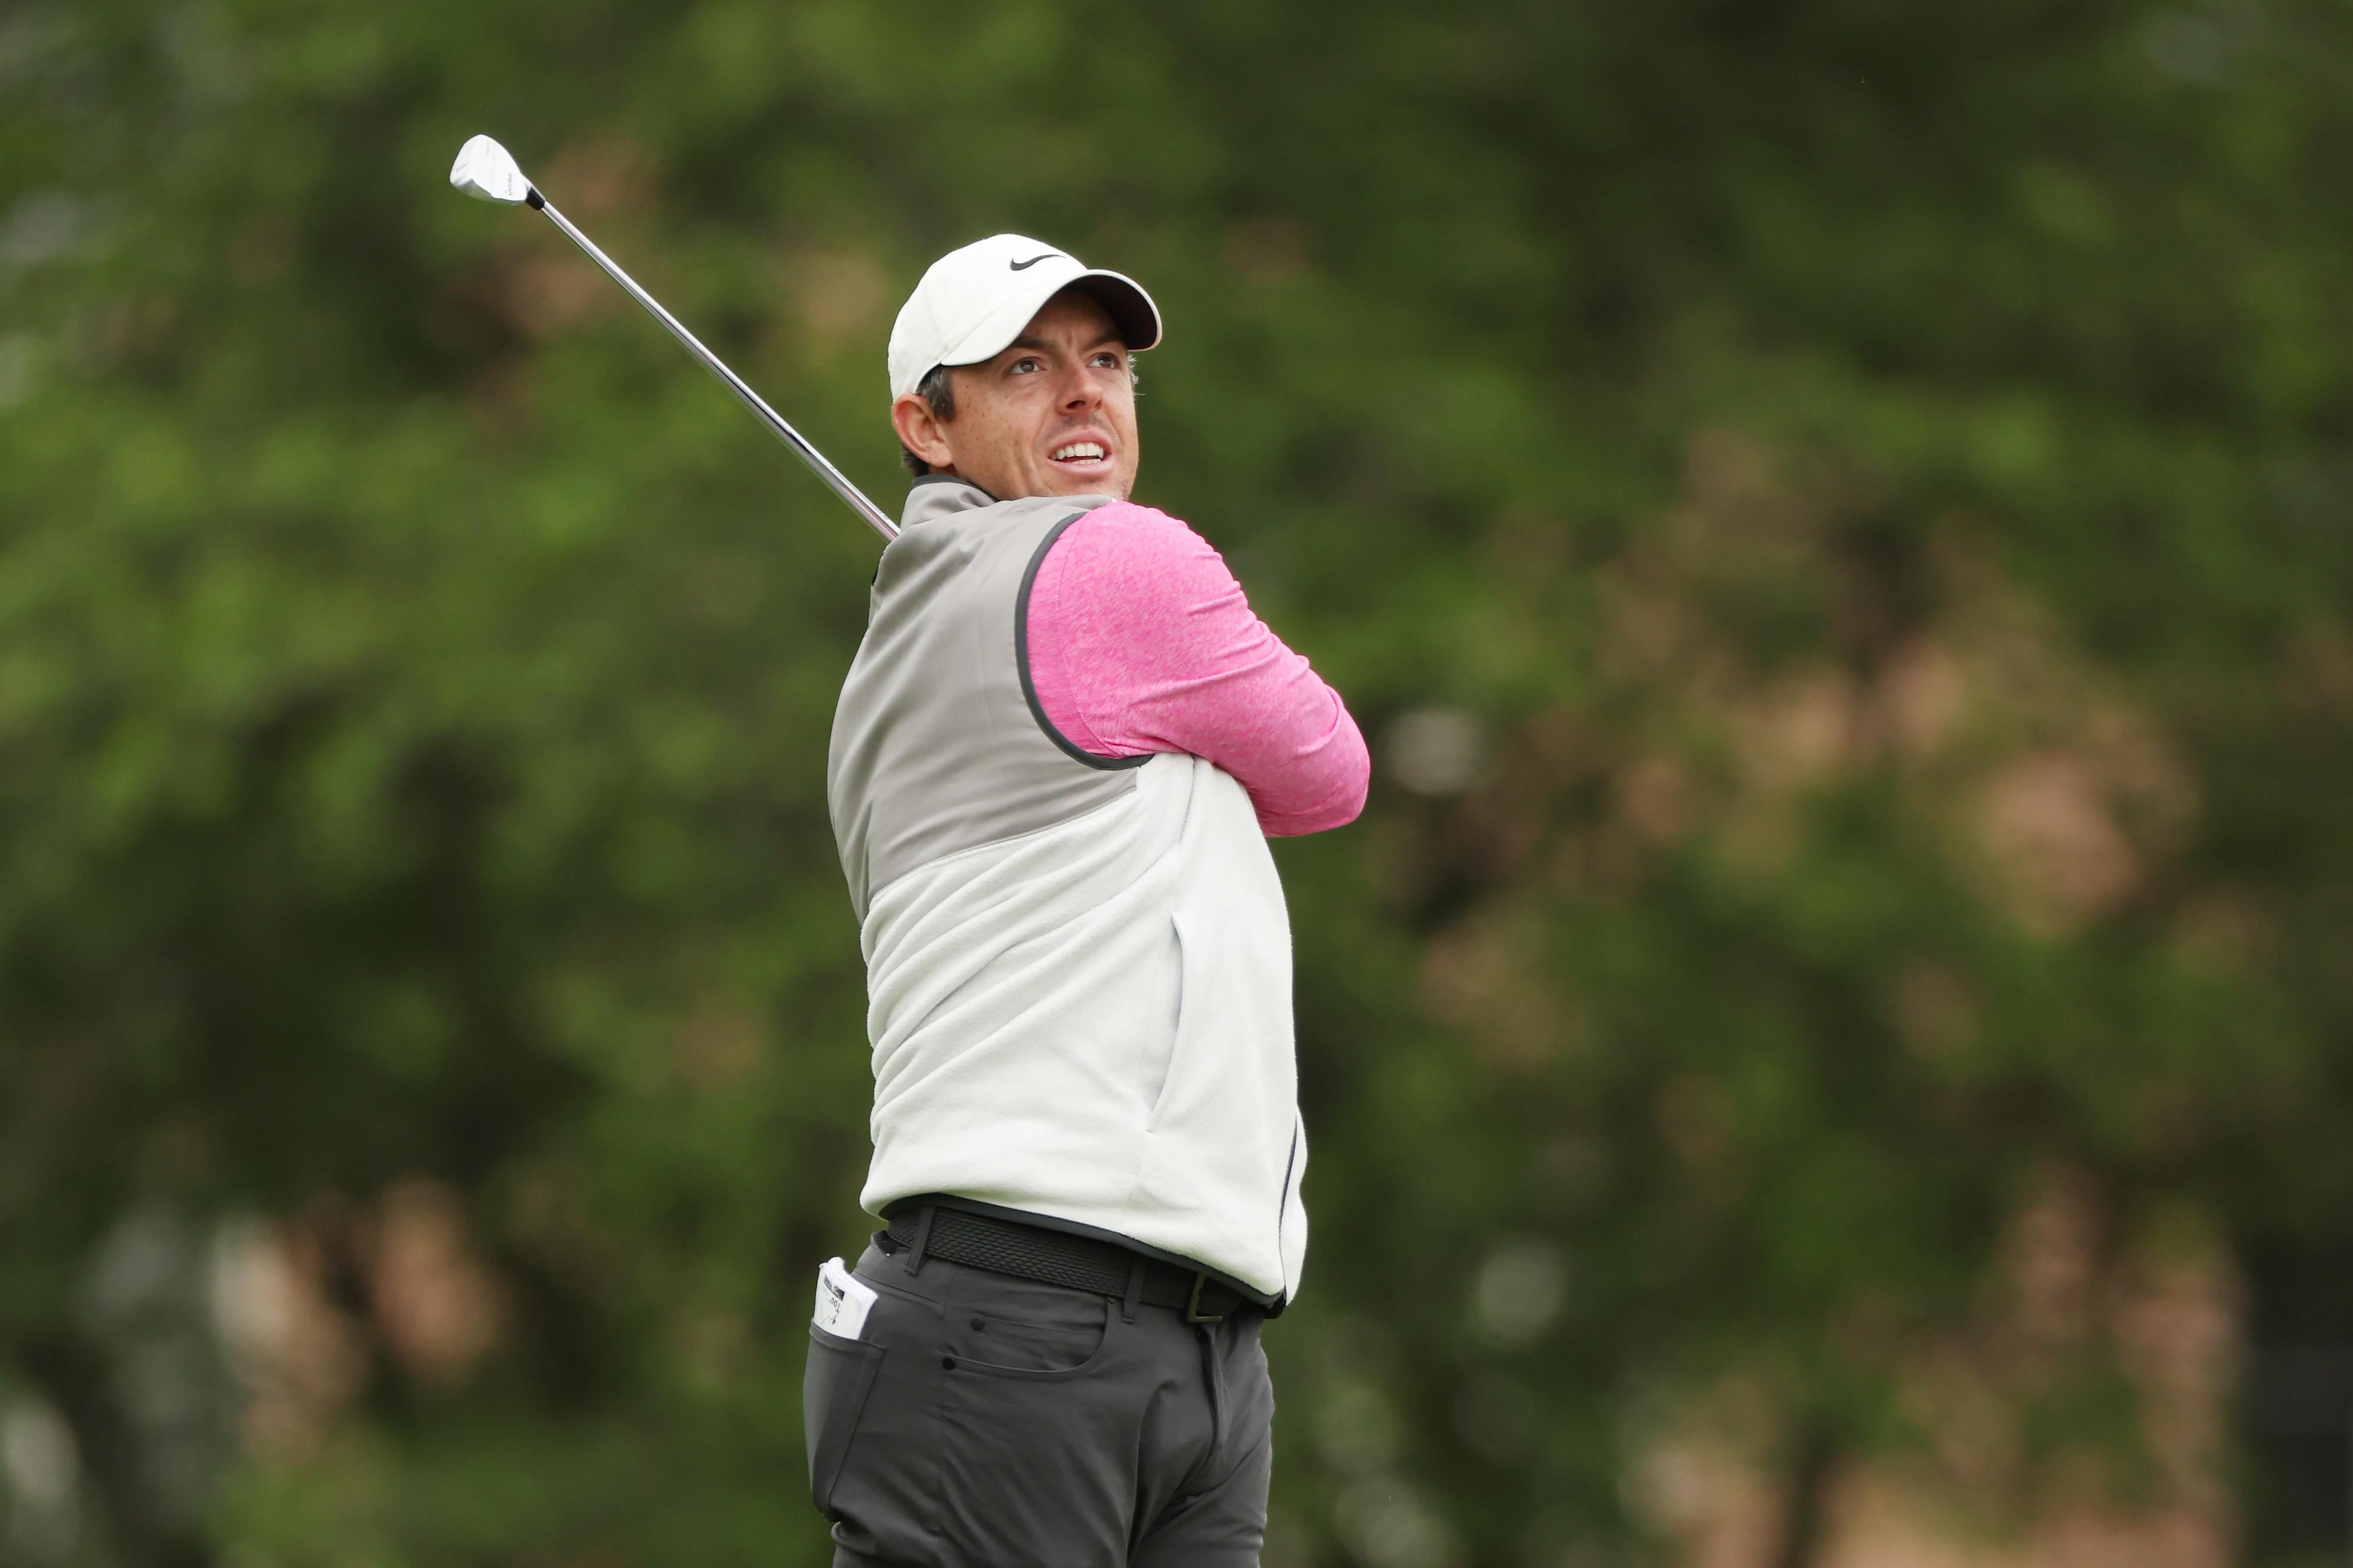 Rory McIlroy of Northern Ireland plays his second shot on the 16th hole during the final round of the Wells Fargo Championship at TPC Potomac at Avenel Farm on May 08, 2022 in Potomac, Maryland.